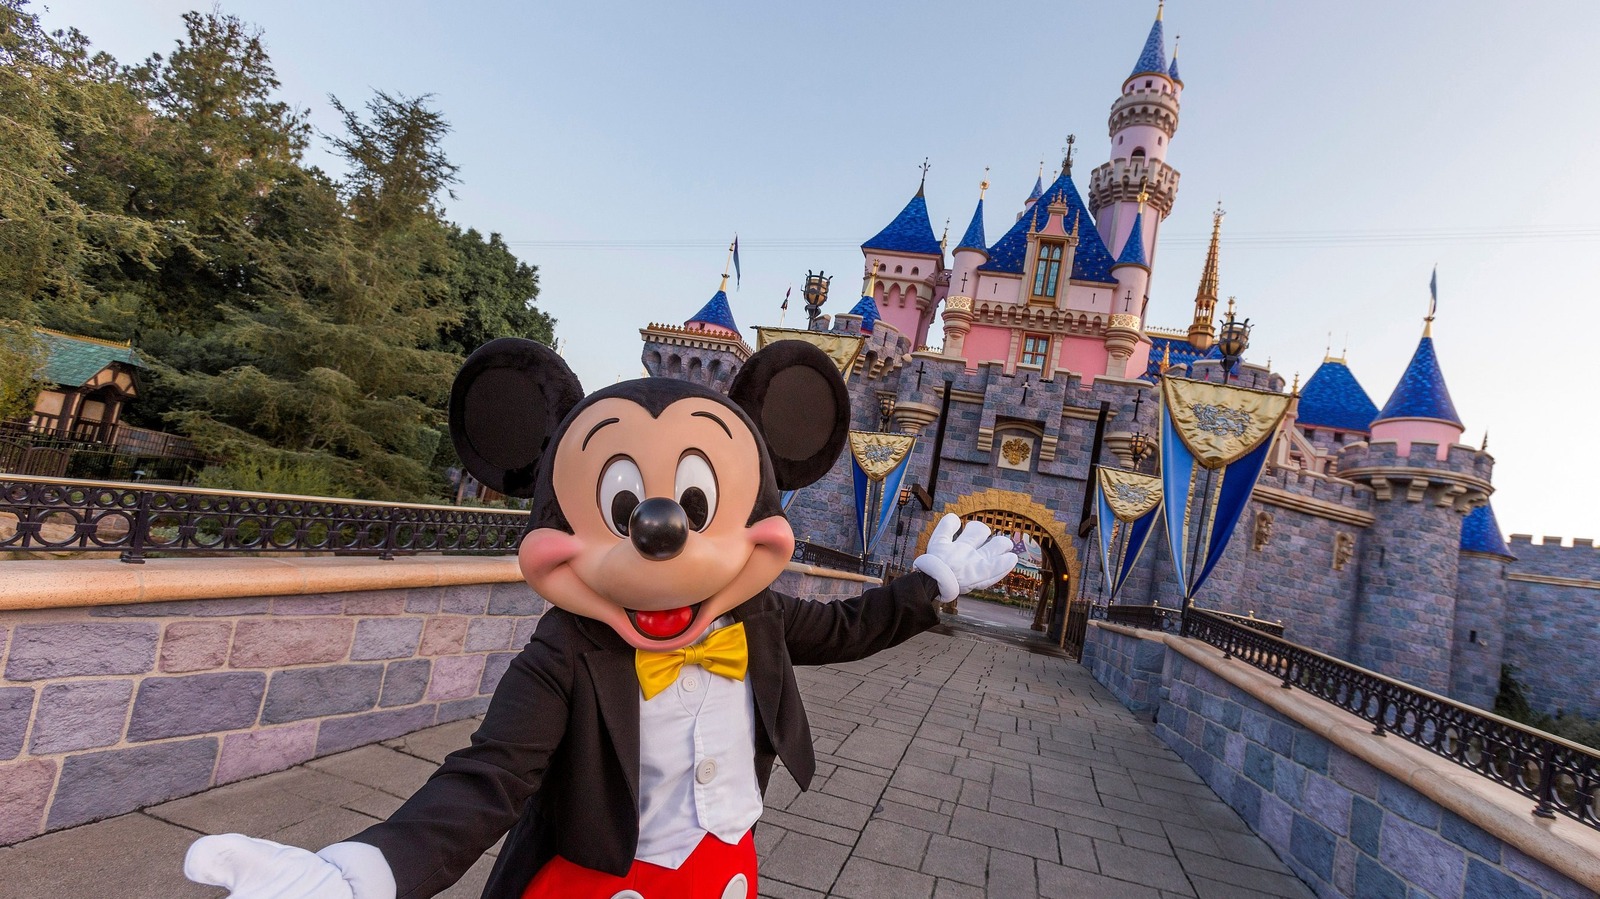 Here's What You Get With A Disney VIP Tour (That Can Cost Thousands)